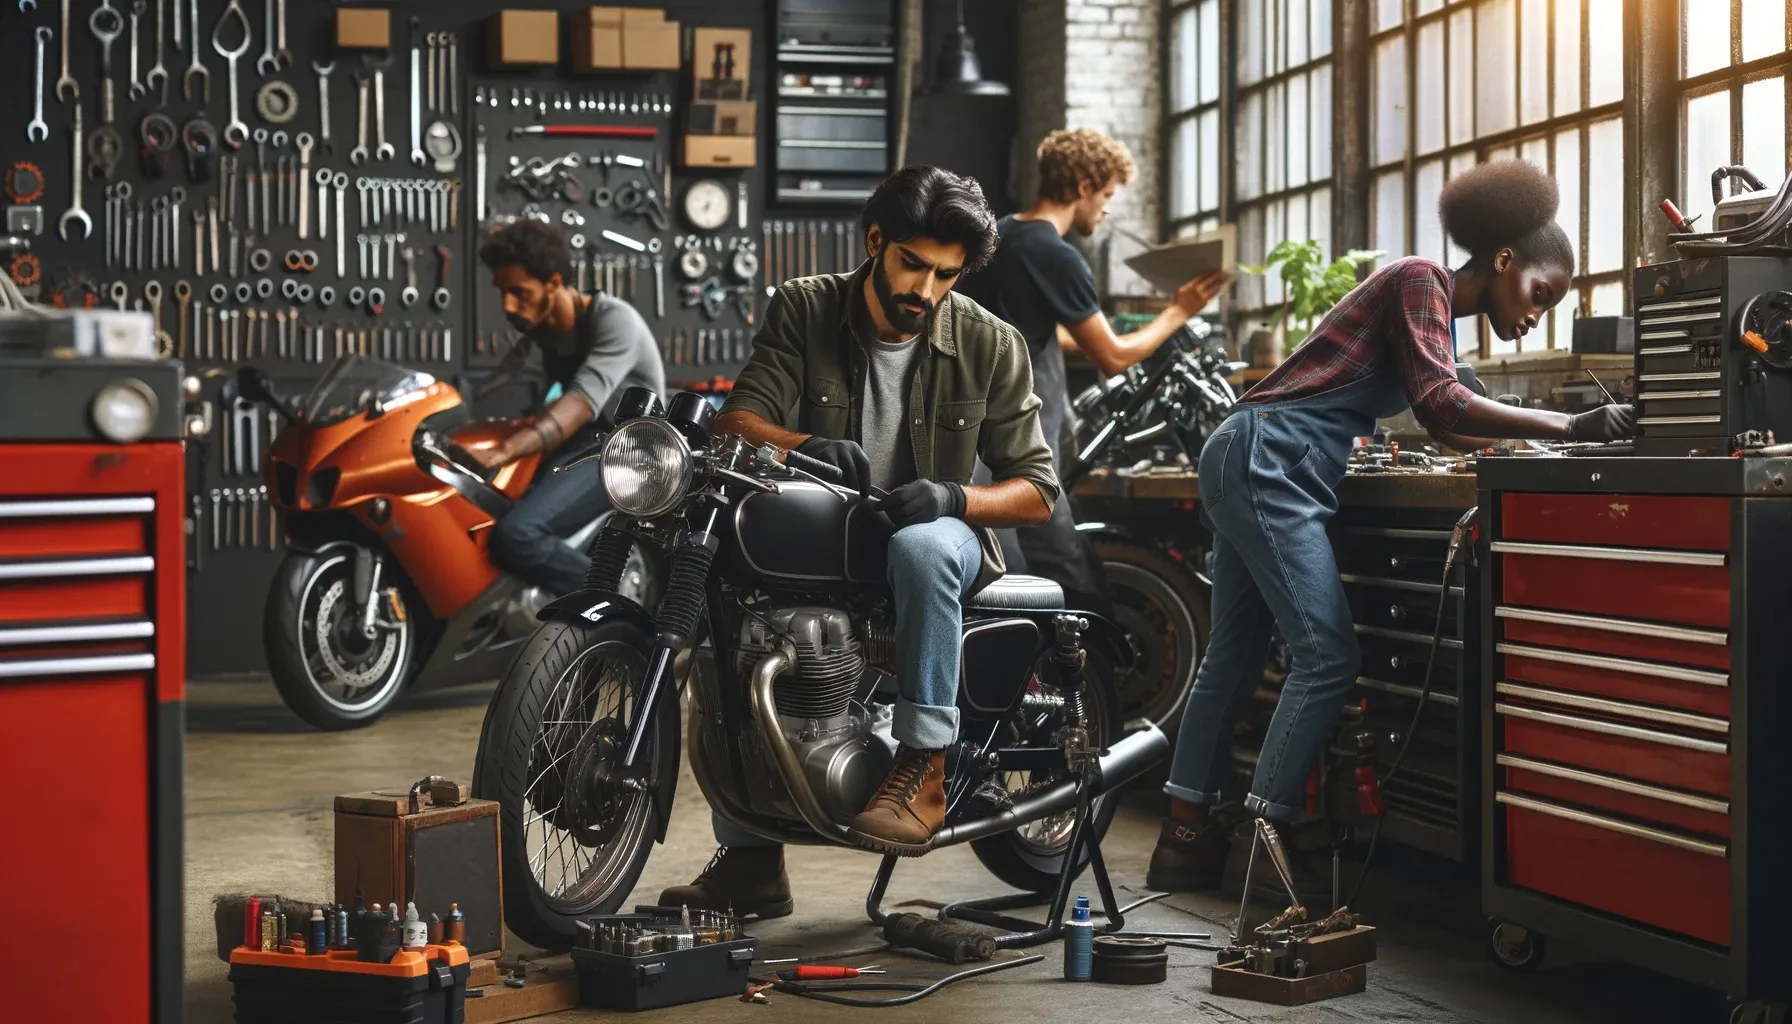 Find a Reliable Motorcycle Mechanic Near Me – Your Guide to Quality Service